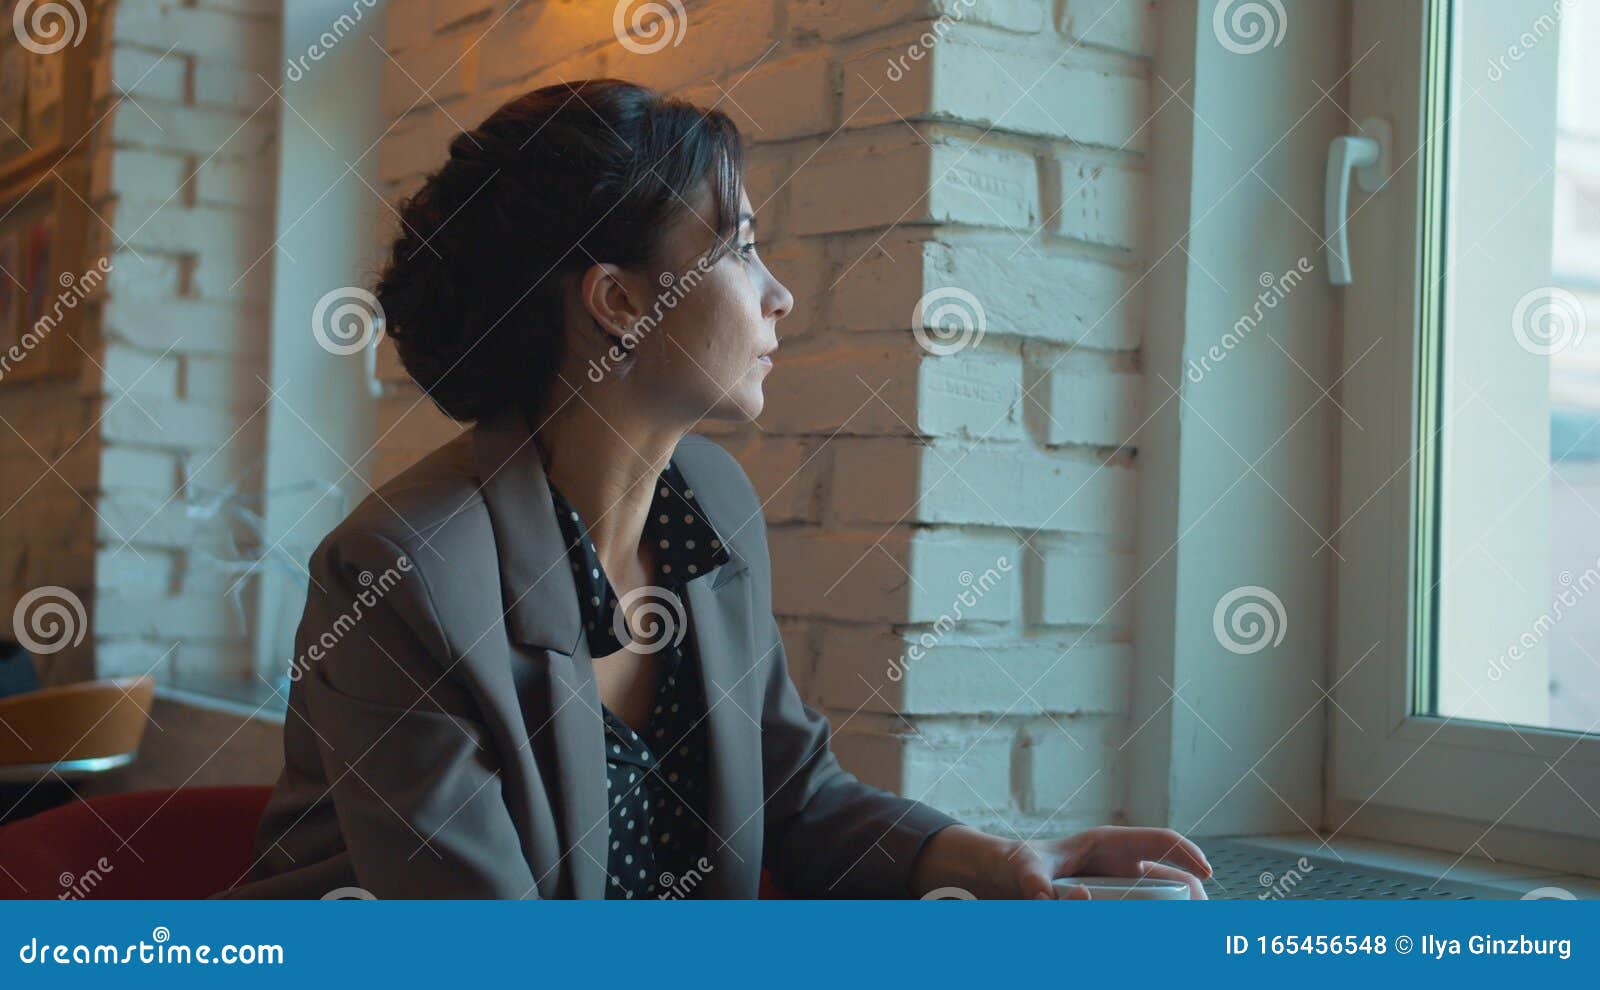 woman drink coffee, look out the window thoughtfully